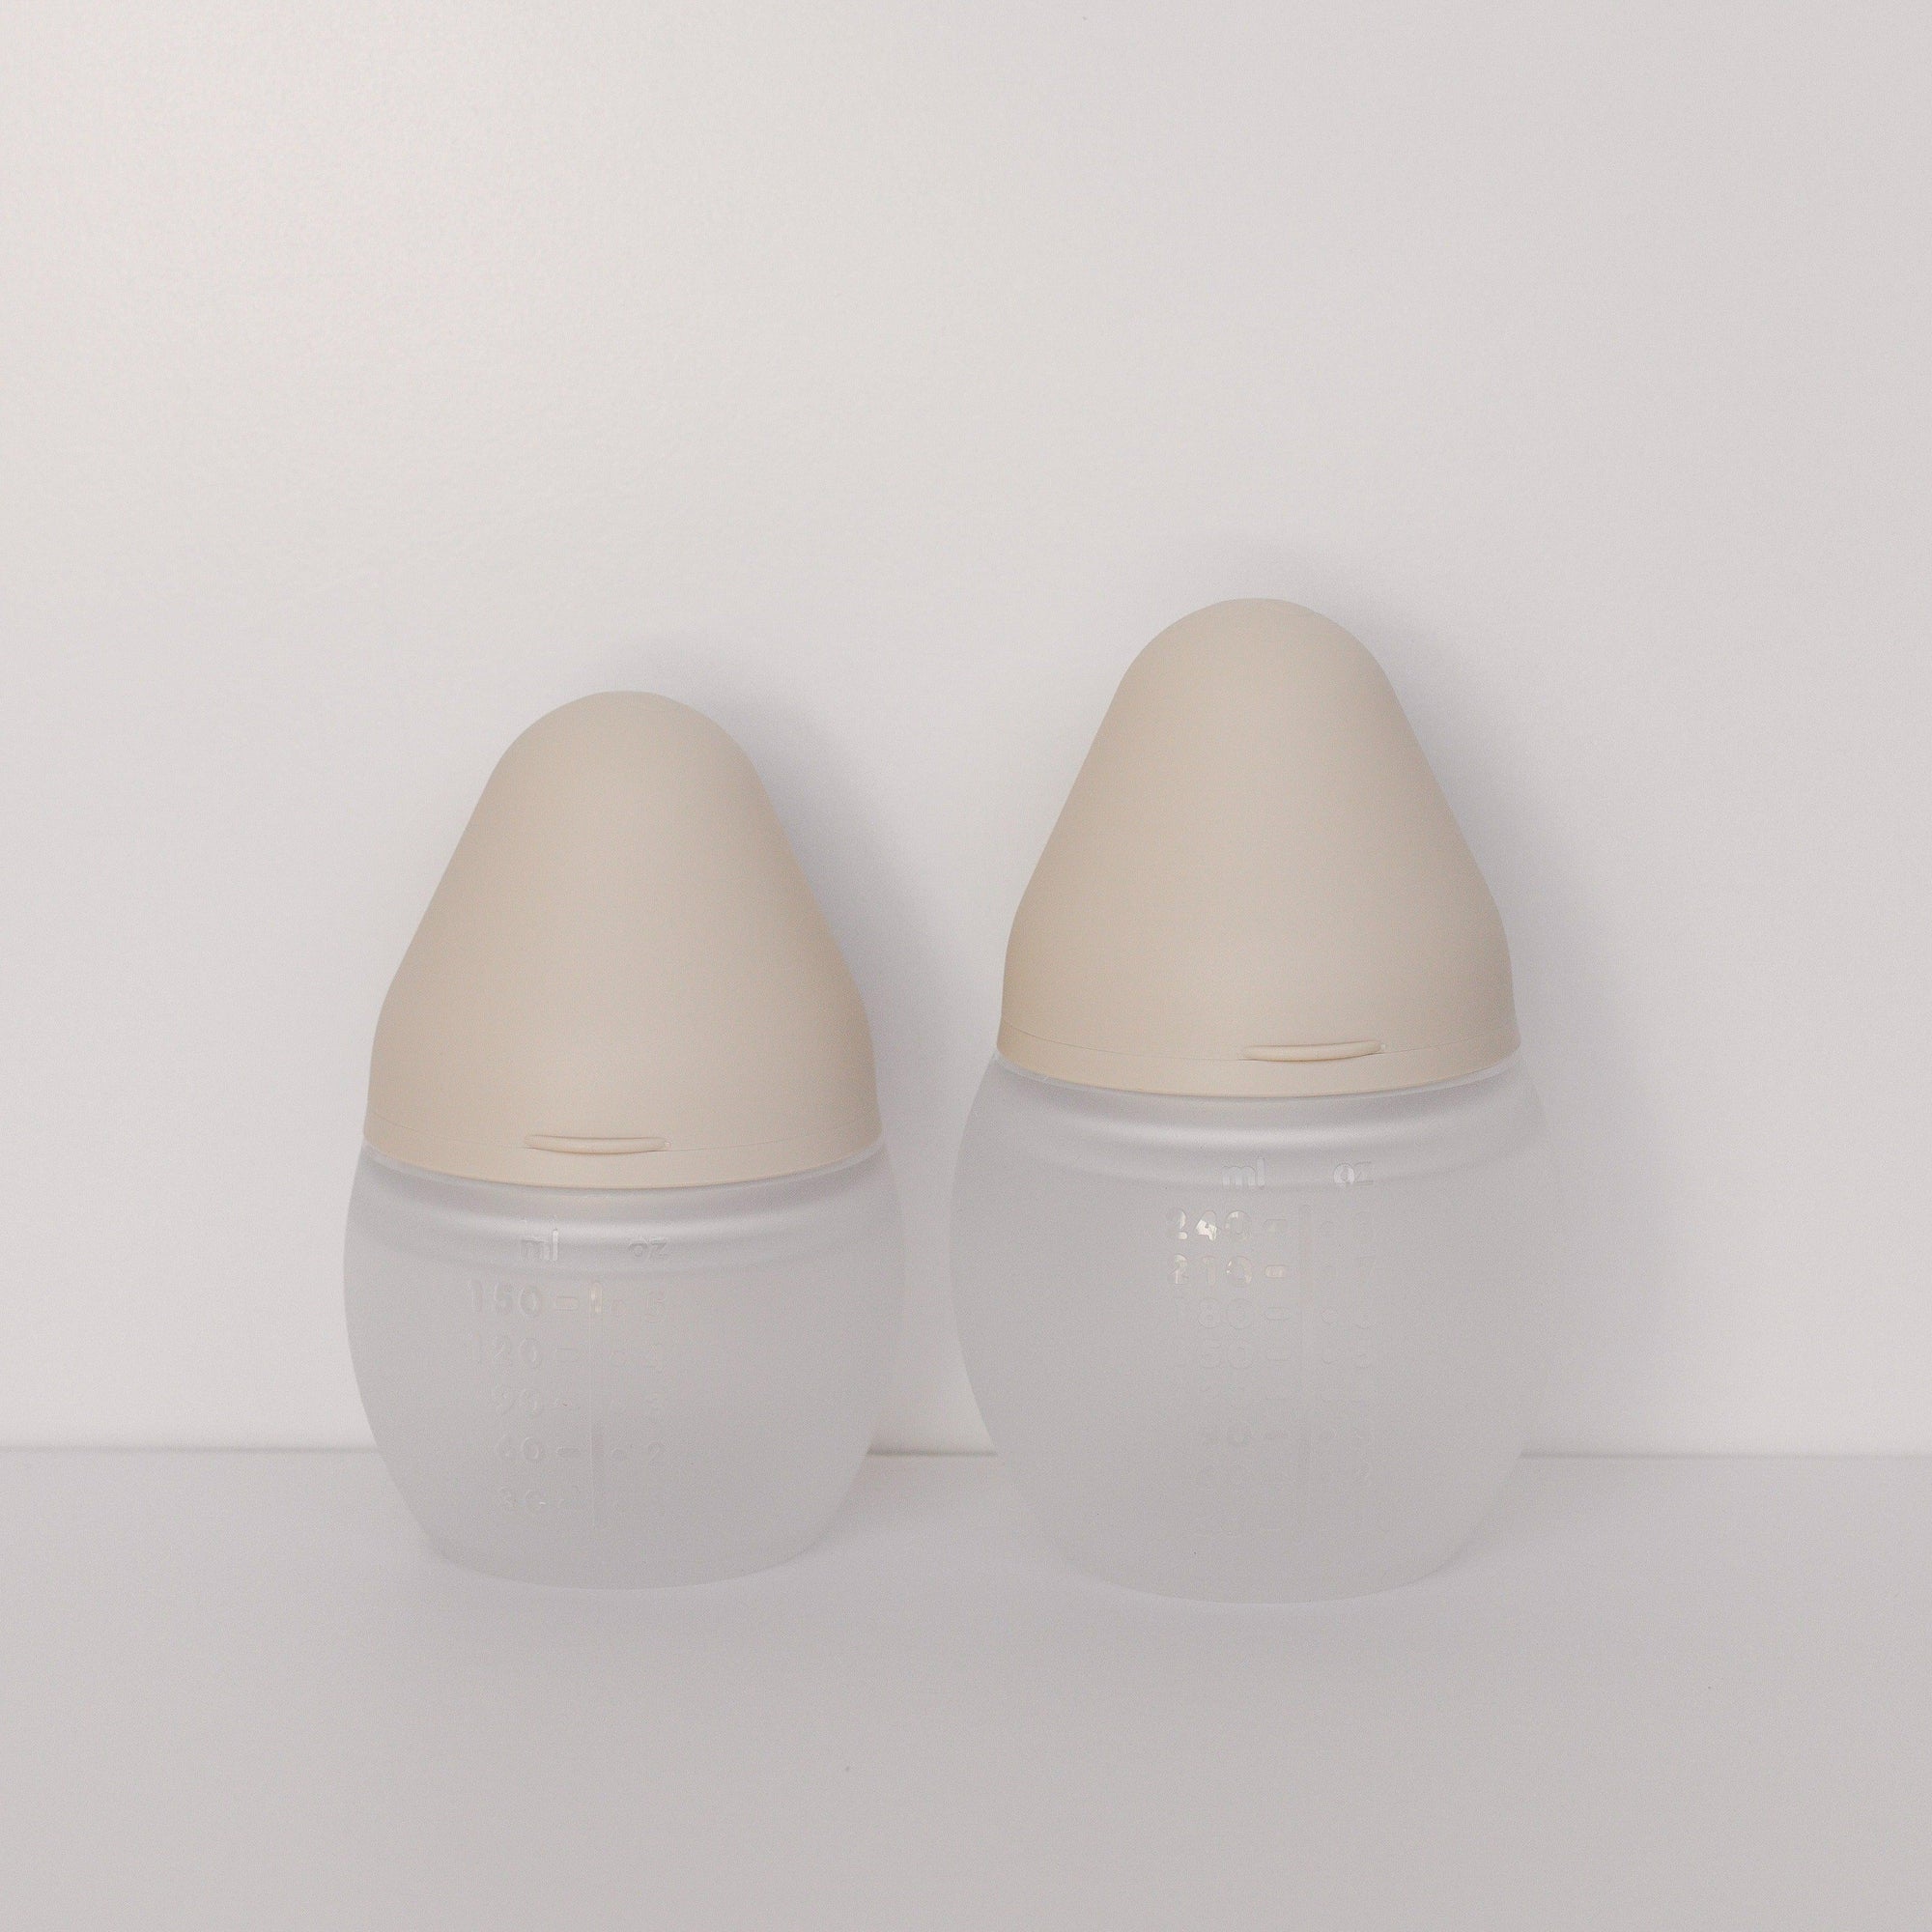 Two Elhée France baby bottles in the shade sand standing against a white surface.